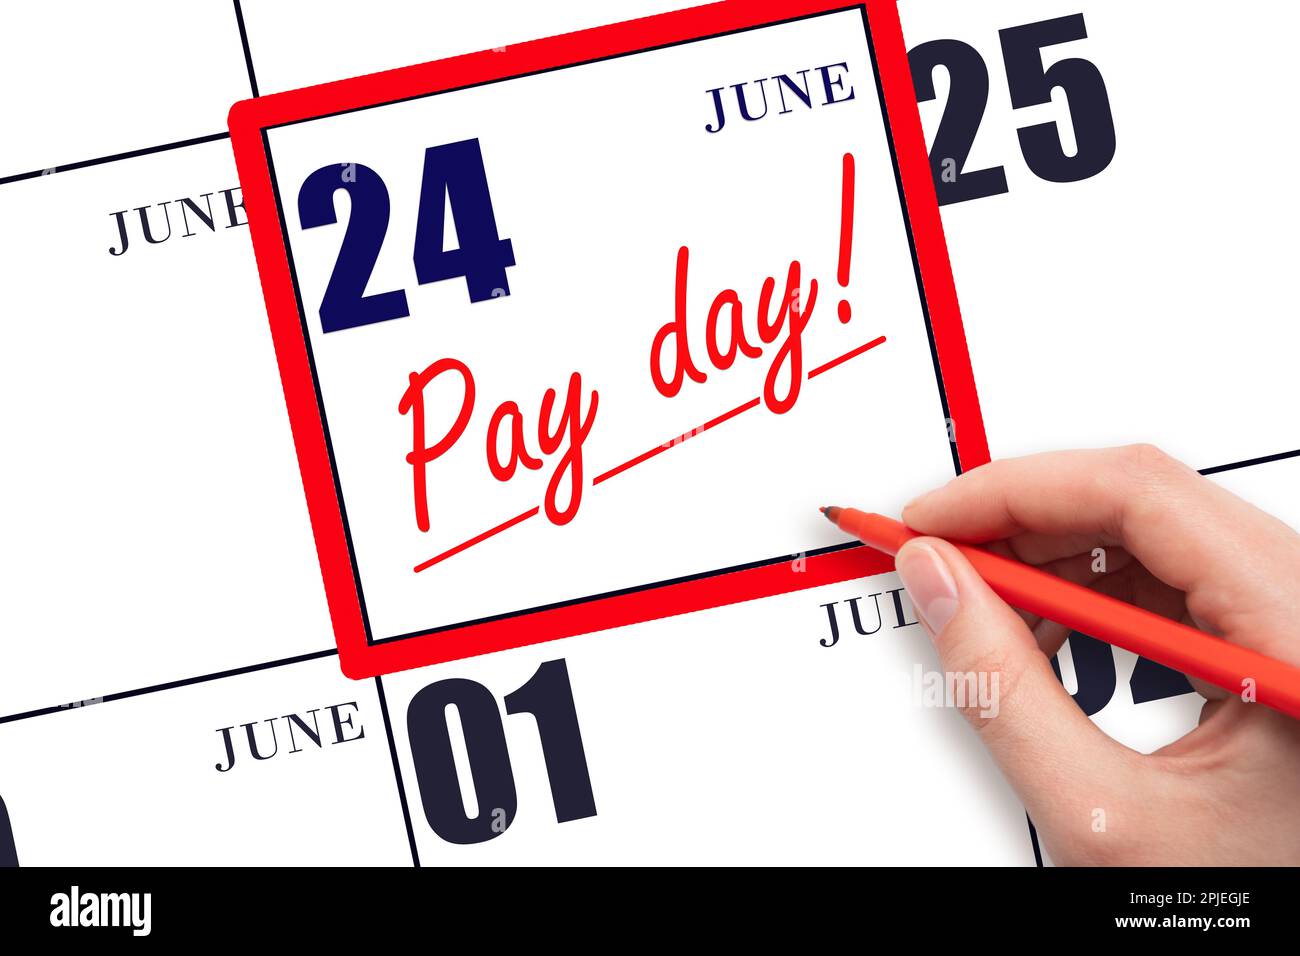 24th day of June. Hand writing text PAY DATE on calendar date June 24 and underline it. Payment due date.  Reminder concept of payment. Summer month, Stock Photo